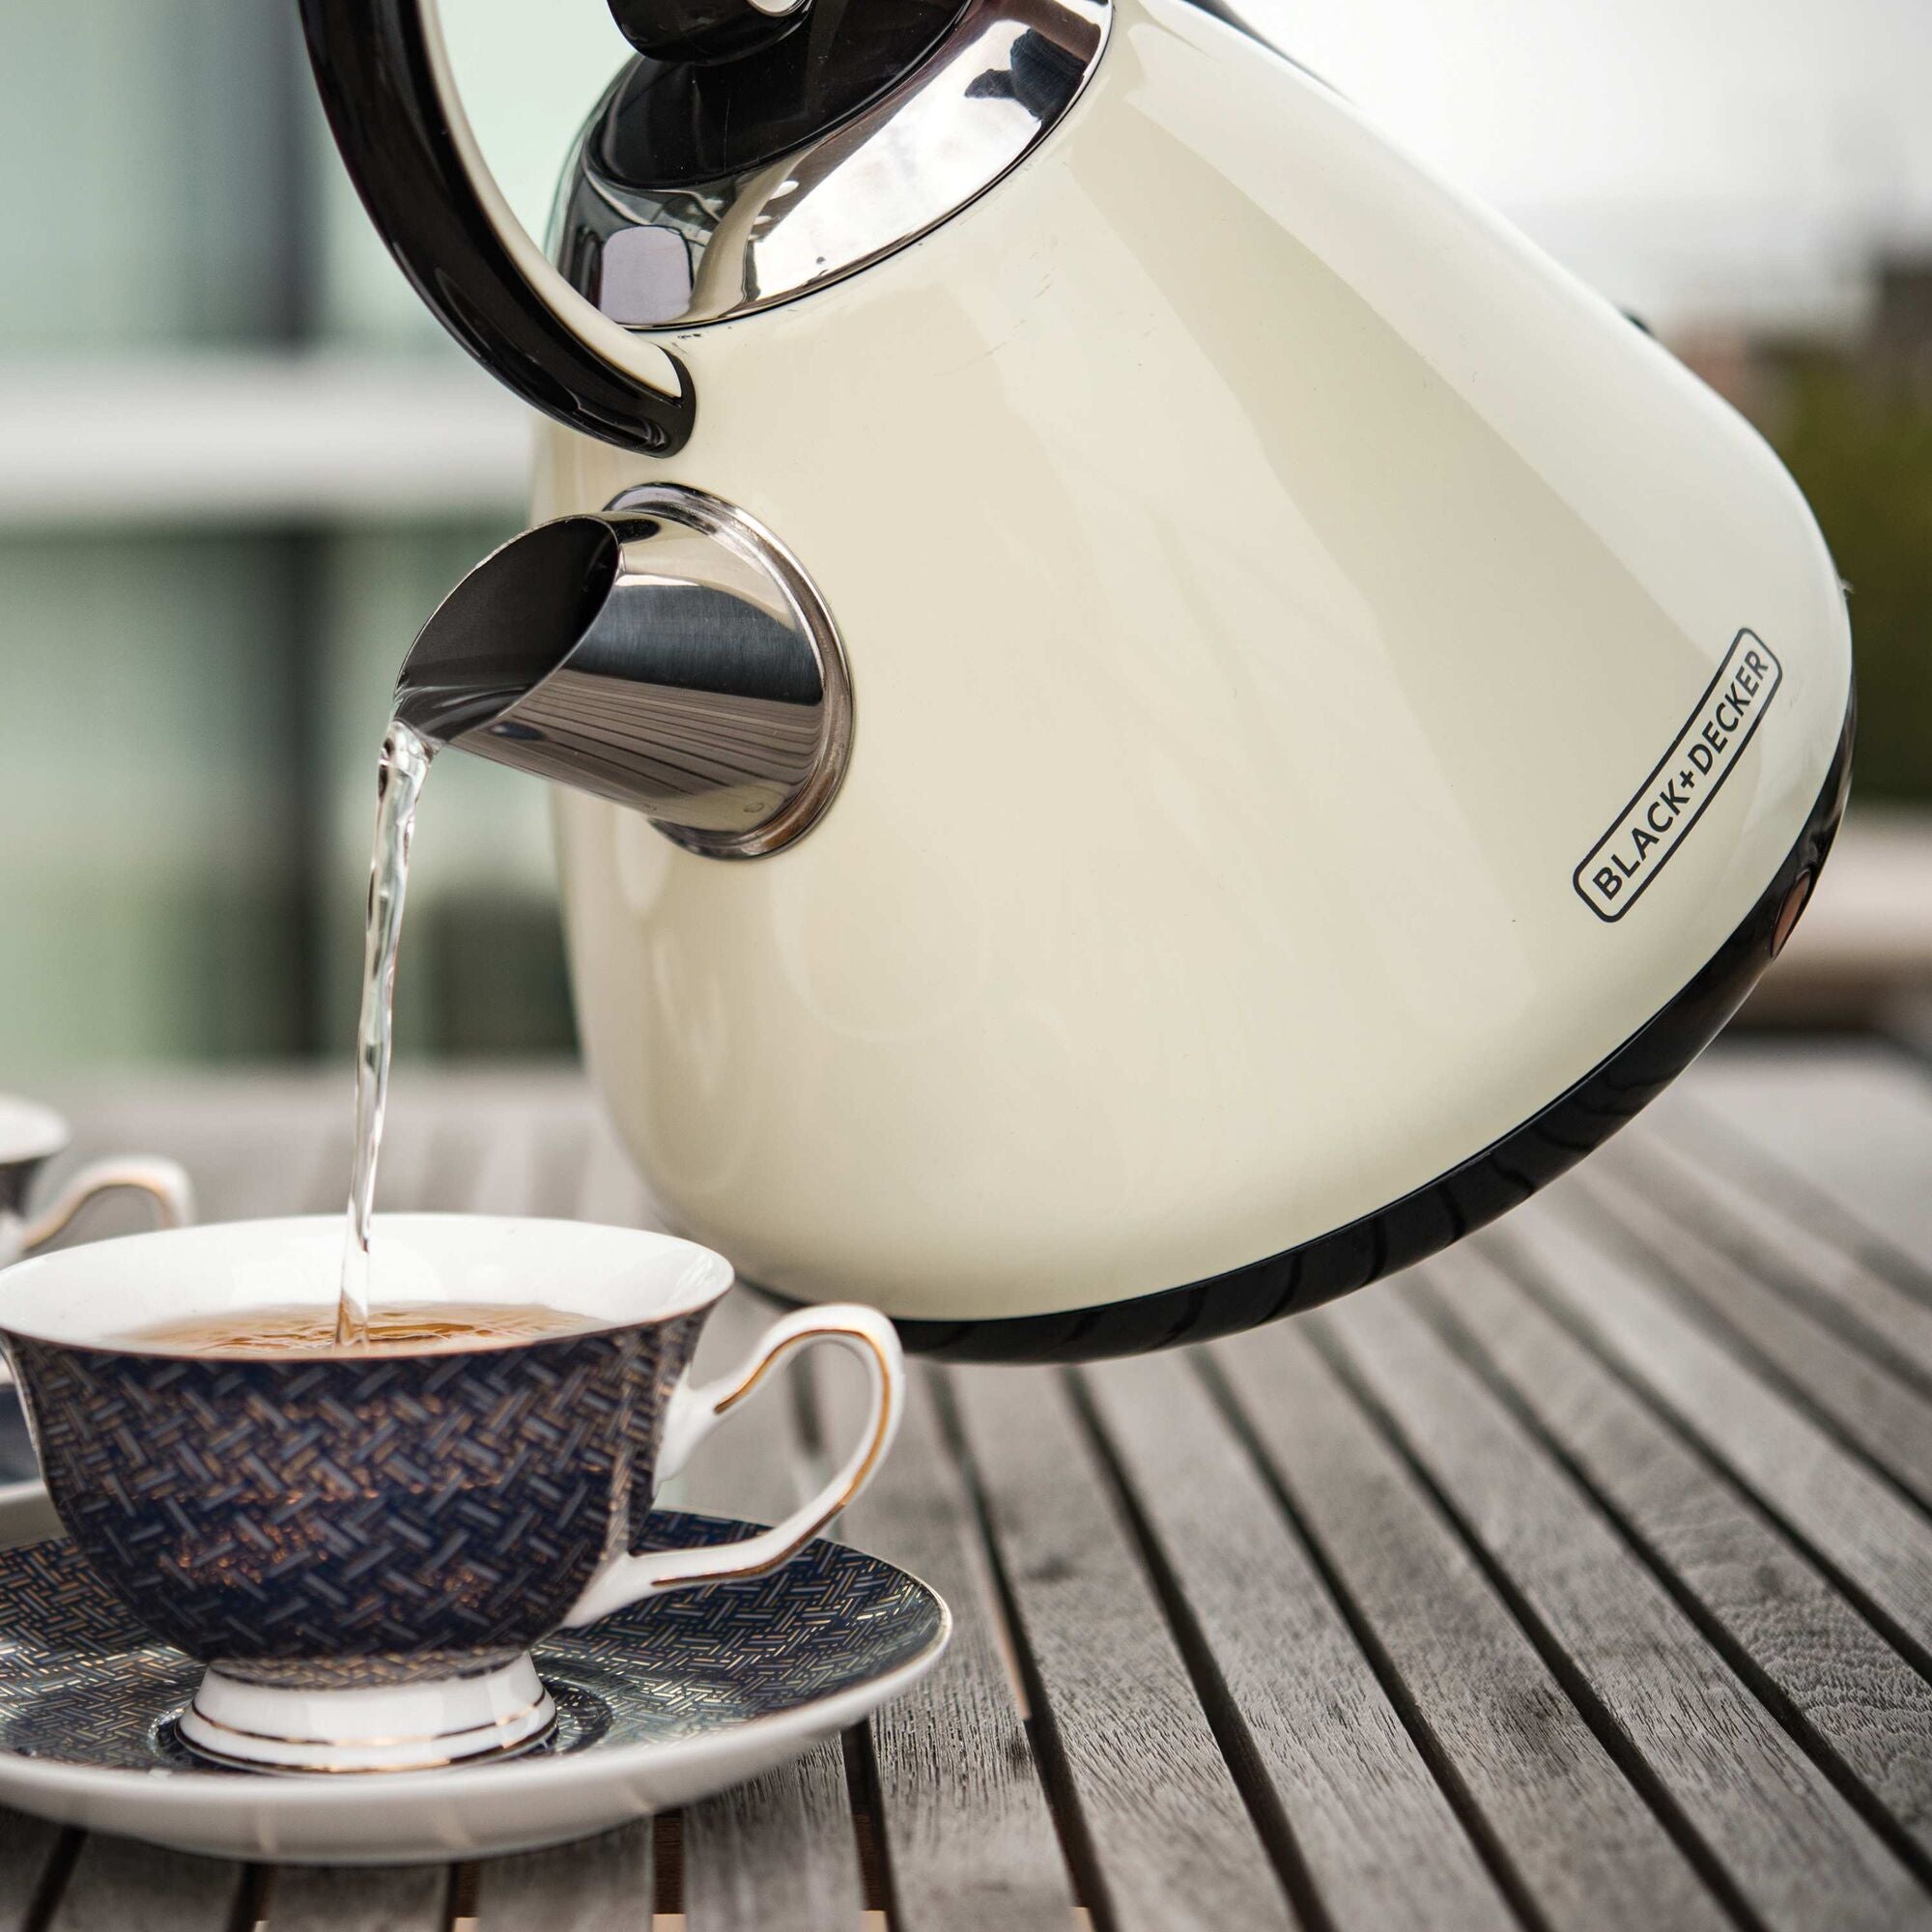 BLACK+DECKER Black 7-Cup Corded Electric Kettle in the Water